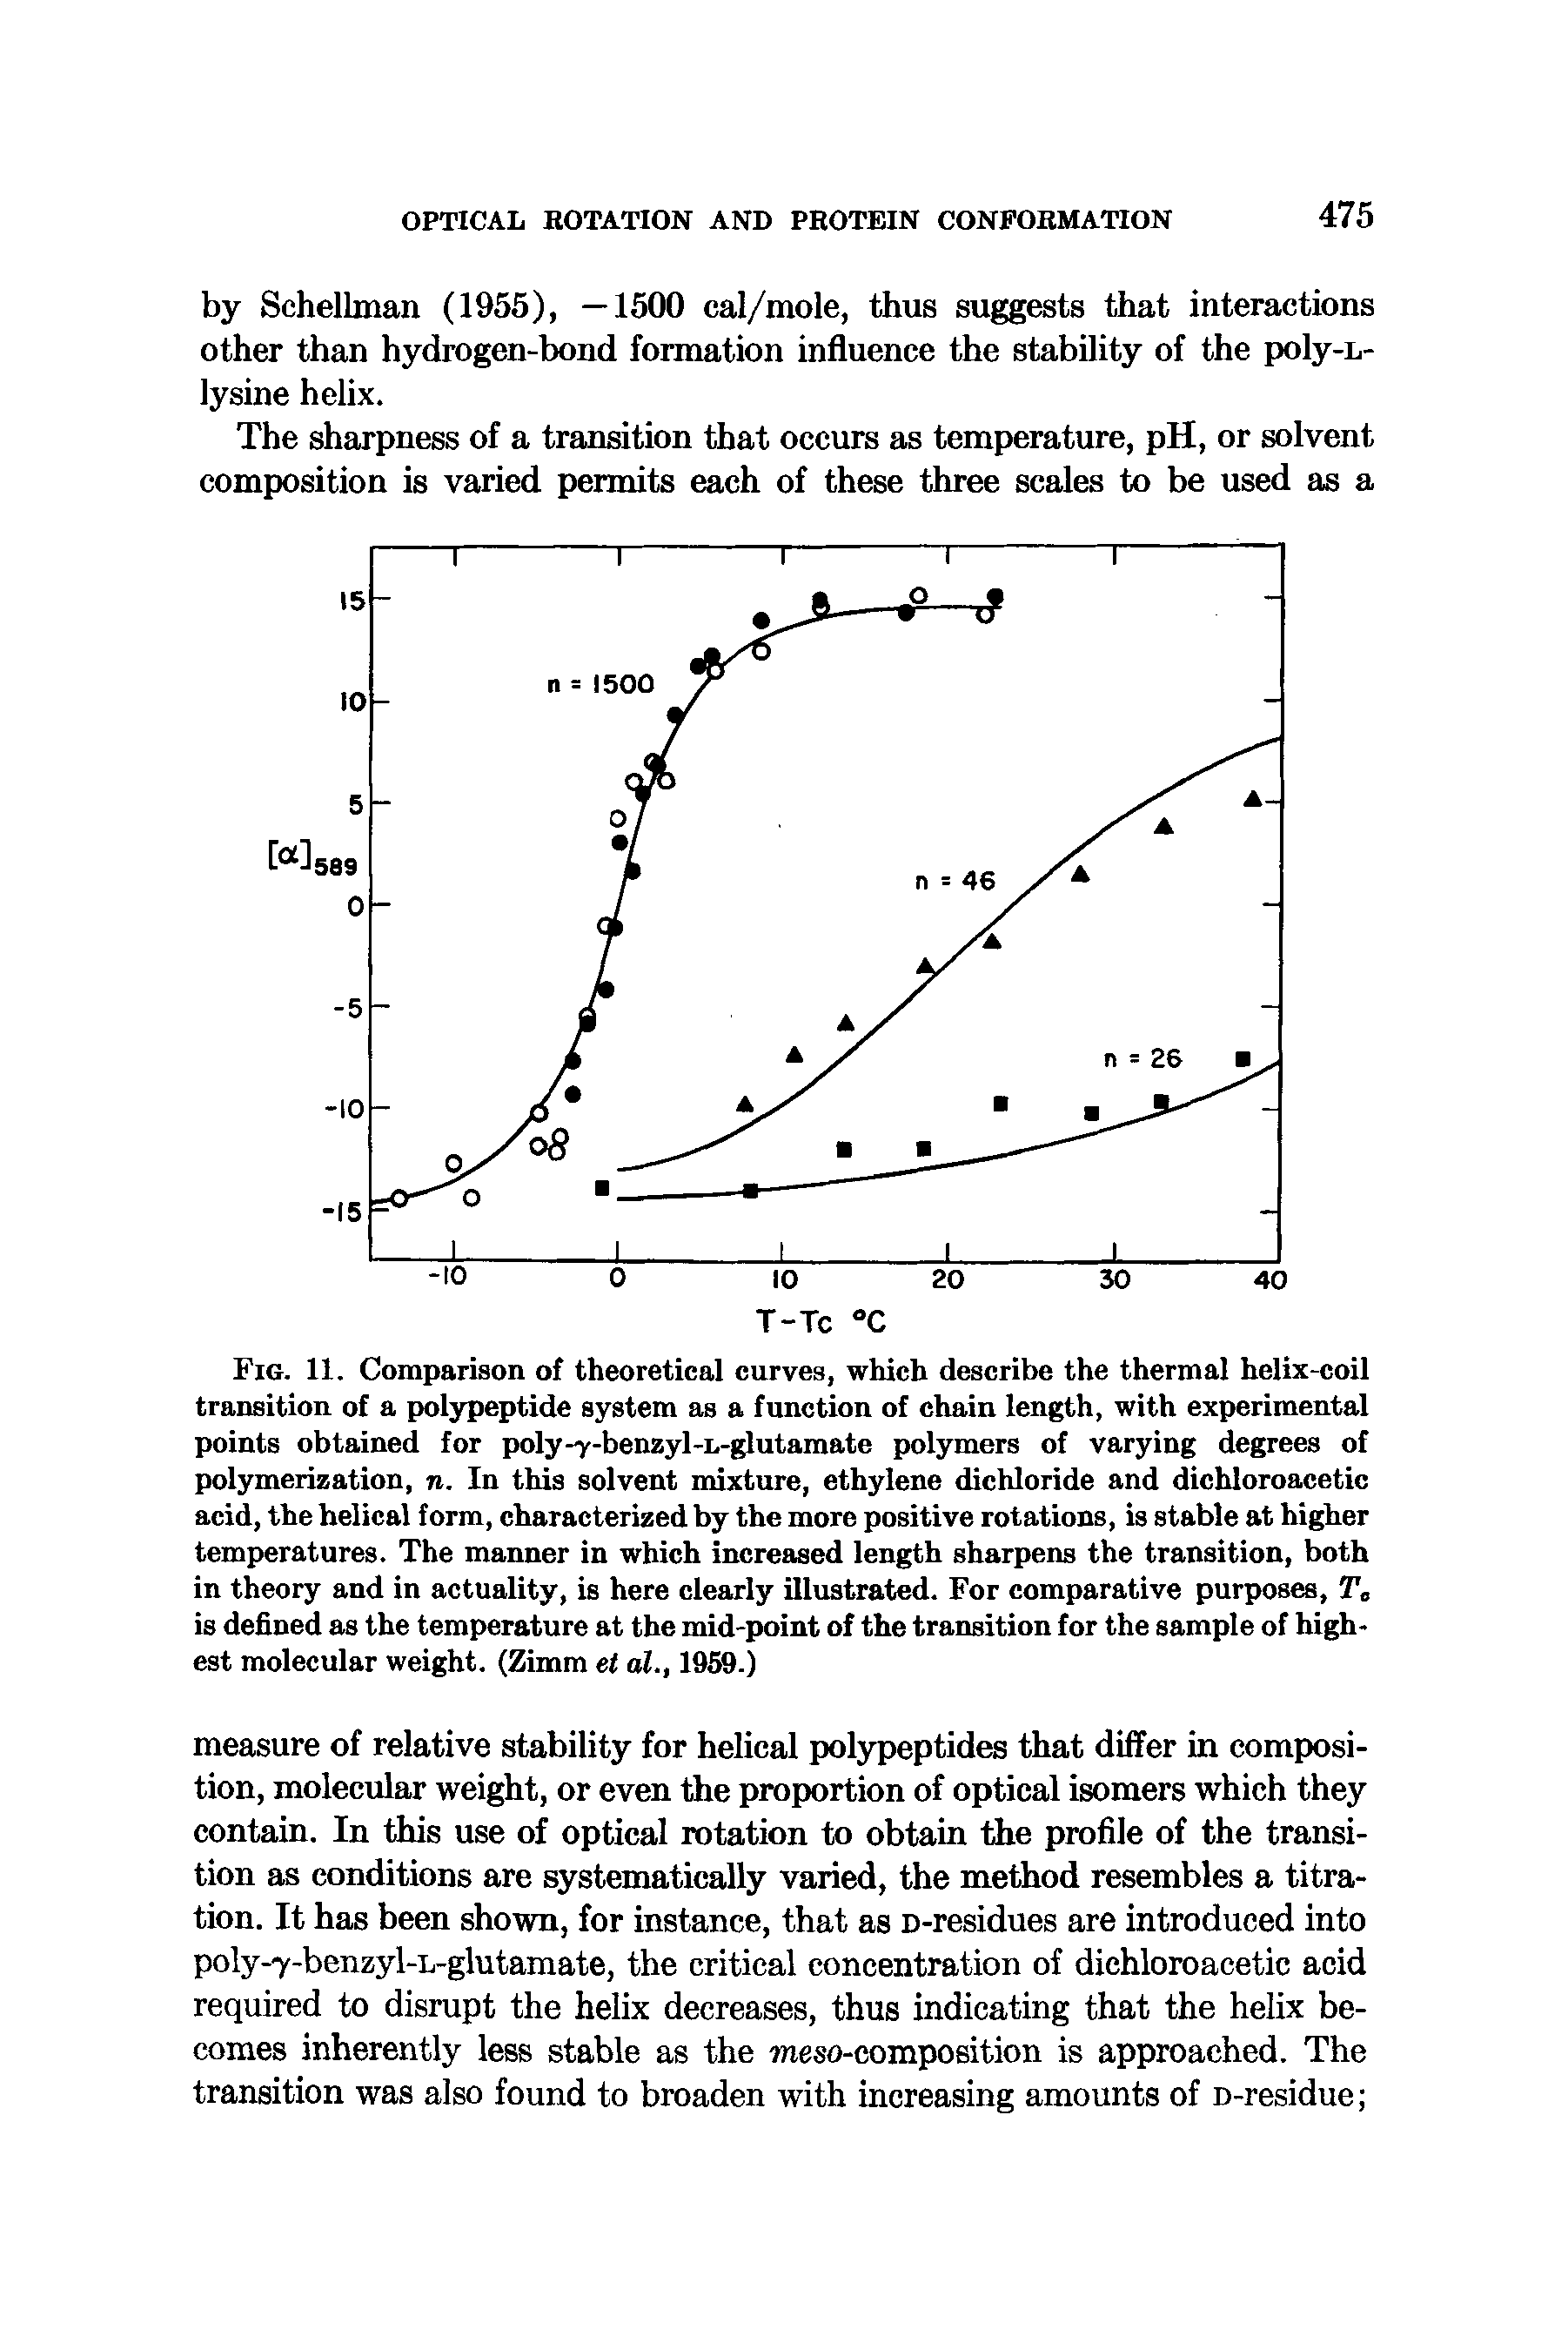 Fig. 11. Comparison of theoretical curves, which describe the thermal helix-coil transition of a polypeptide system as a function of chain length, with experimental points obtained for poly-->-benzyl-i,-glutamate polymers of varying degrees of polymerization, n. In this solvent mixture, ethylene dichloride and dichloroacetic acid, the helical form, characterized by the more positive rotations, is stable at higher temperatures. The manner in which increased length sharpens the transition, both in theory and in actuality, is here clearly illustrated. For comparative purposes, Tc is defined as the temperature at the mid-point of the transition for the sample of highest molecular weight. (Zimm et al., 1959.)...